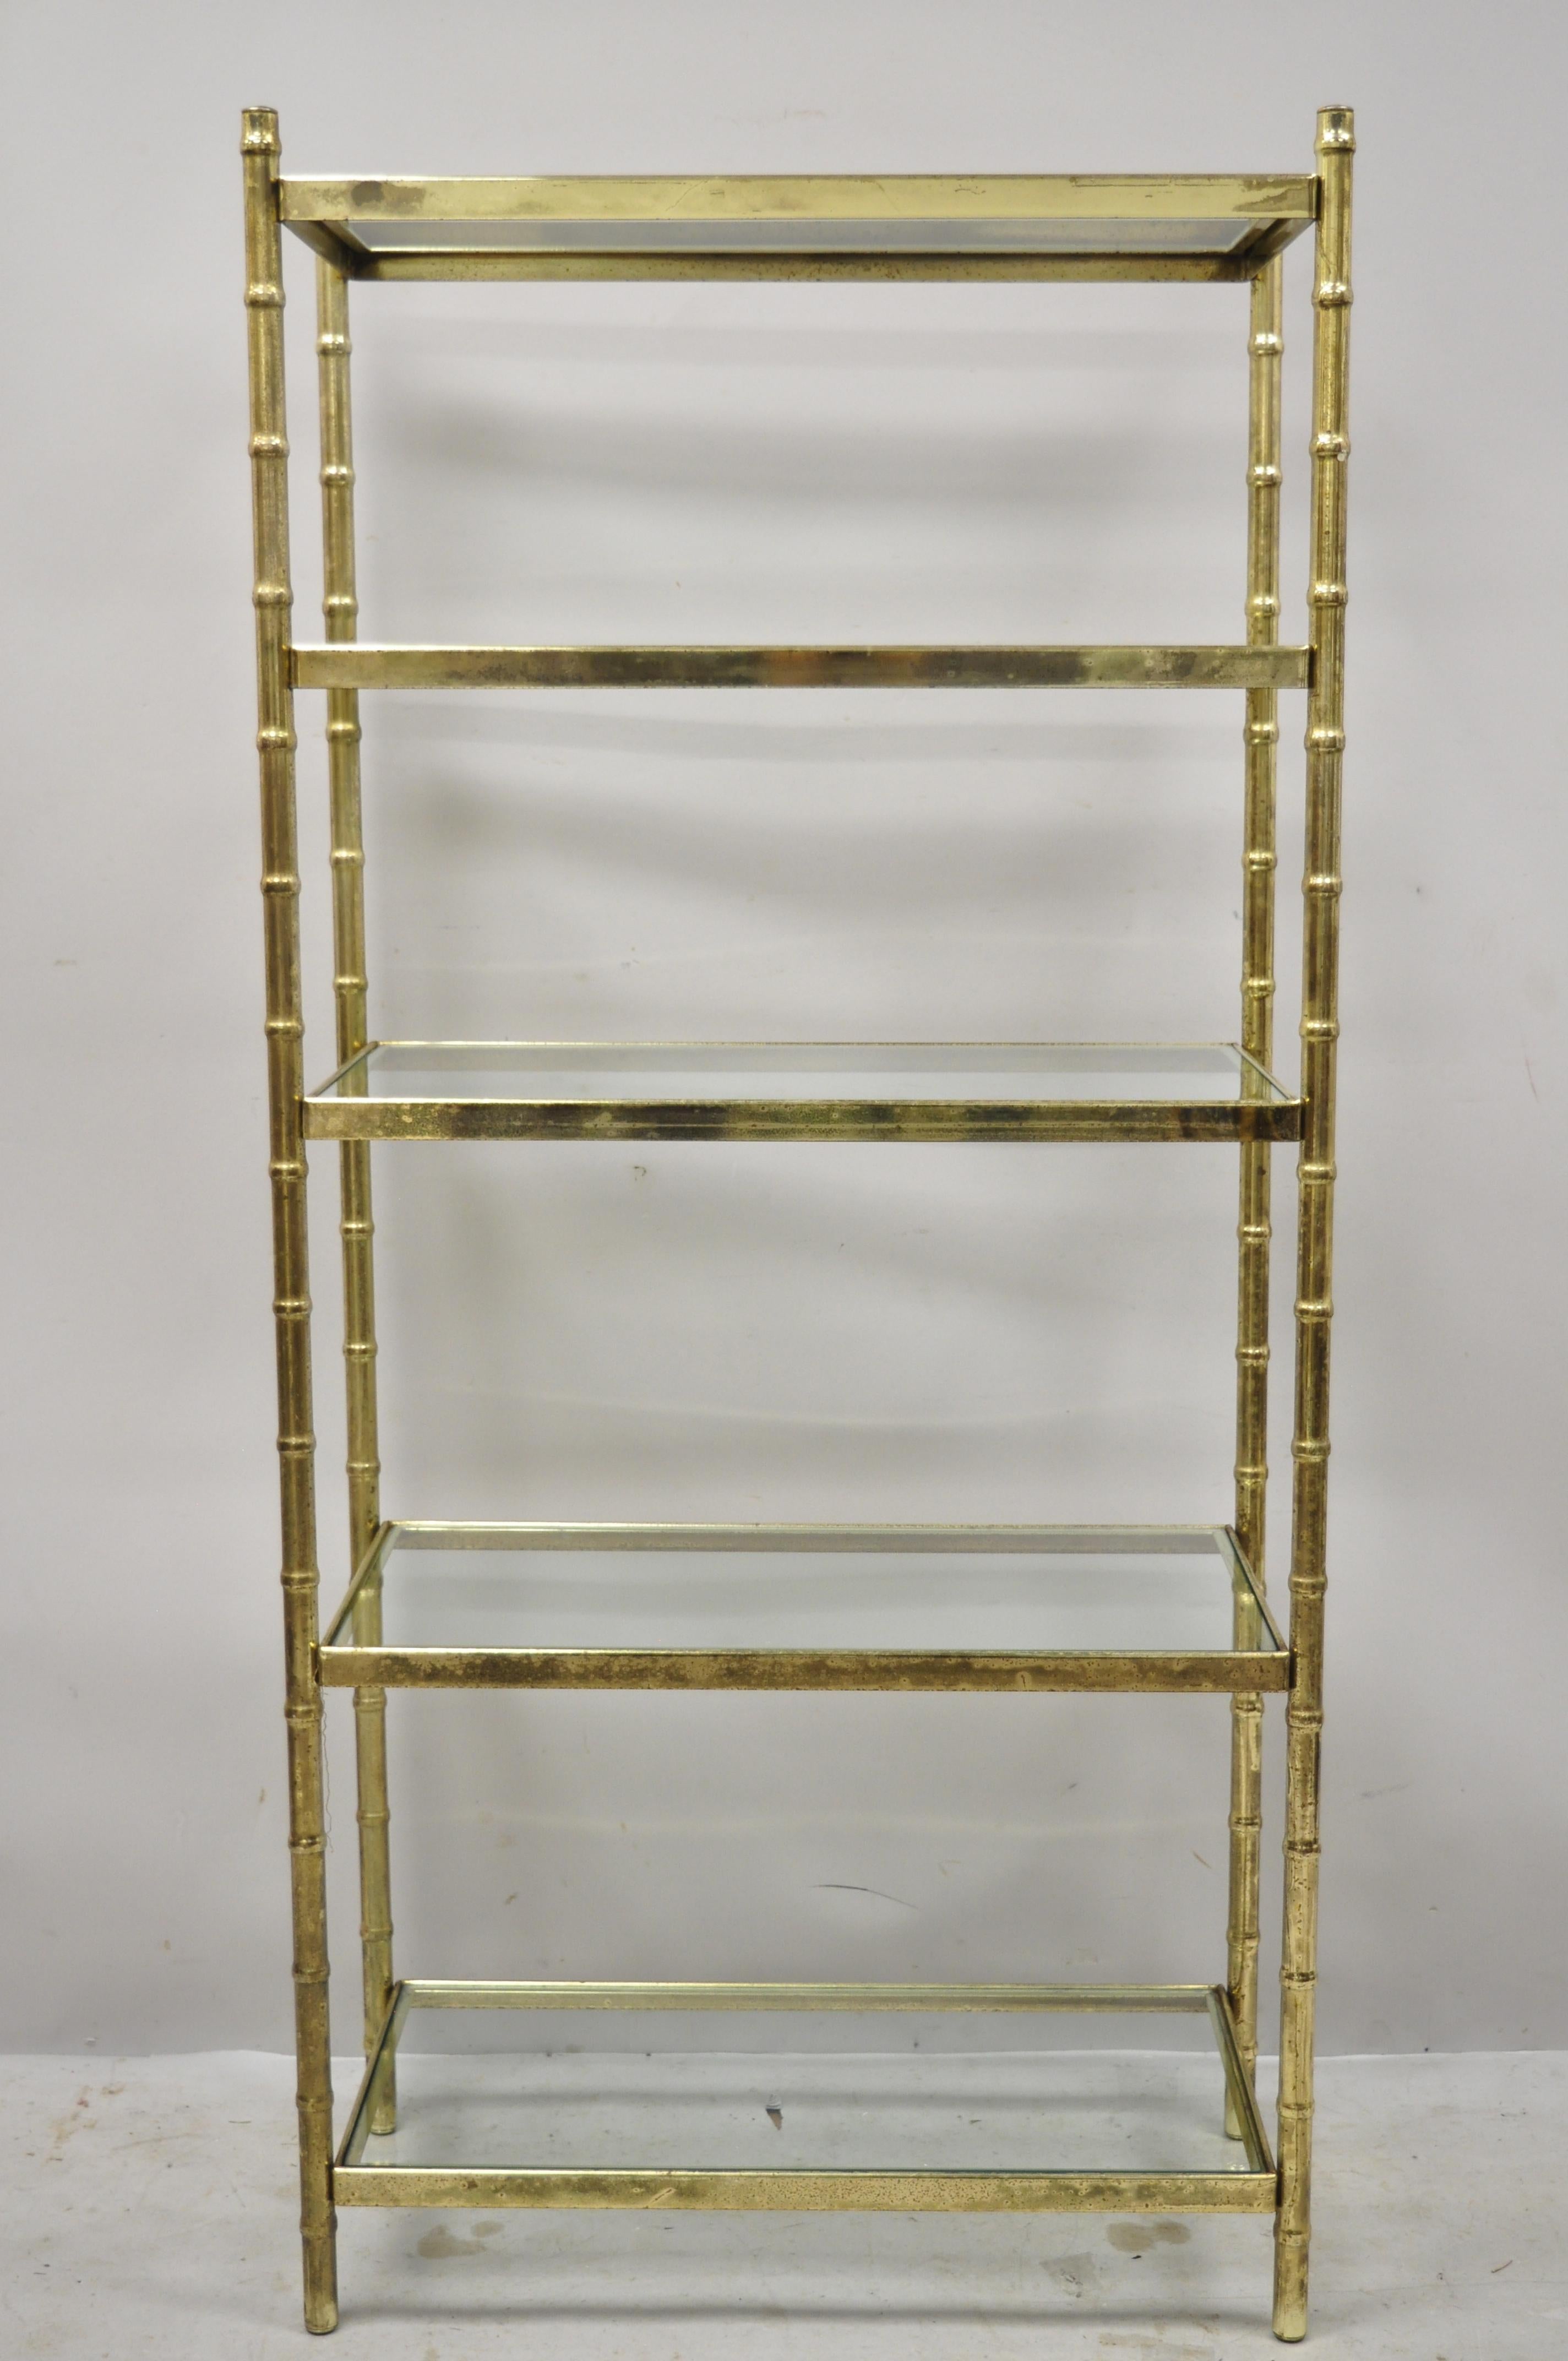 Vintage Hollywood Regency faux bamboo gold metal étagère bookshelf shelf stand. Item features faux bamboo metal frame, glass shelves, very nice vintage item, great style and form, circa mid to late 20th century. Measurements: 56.25